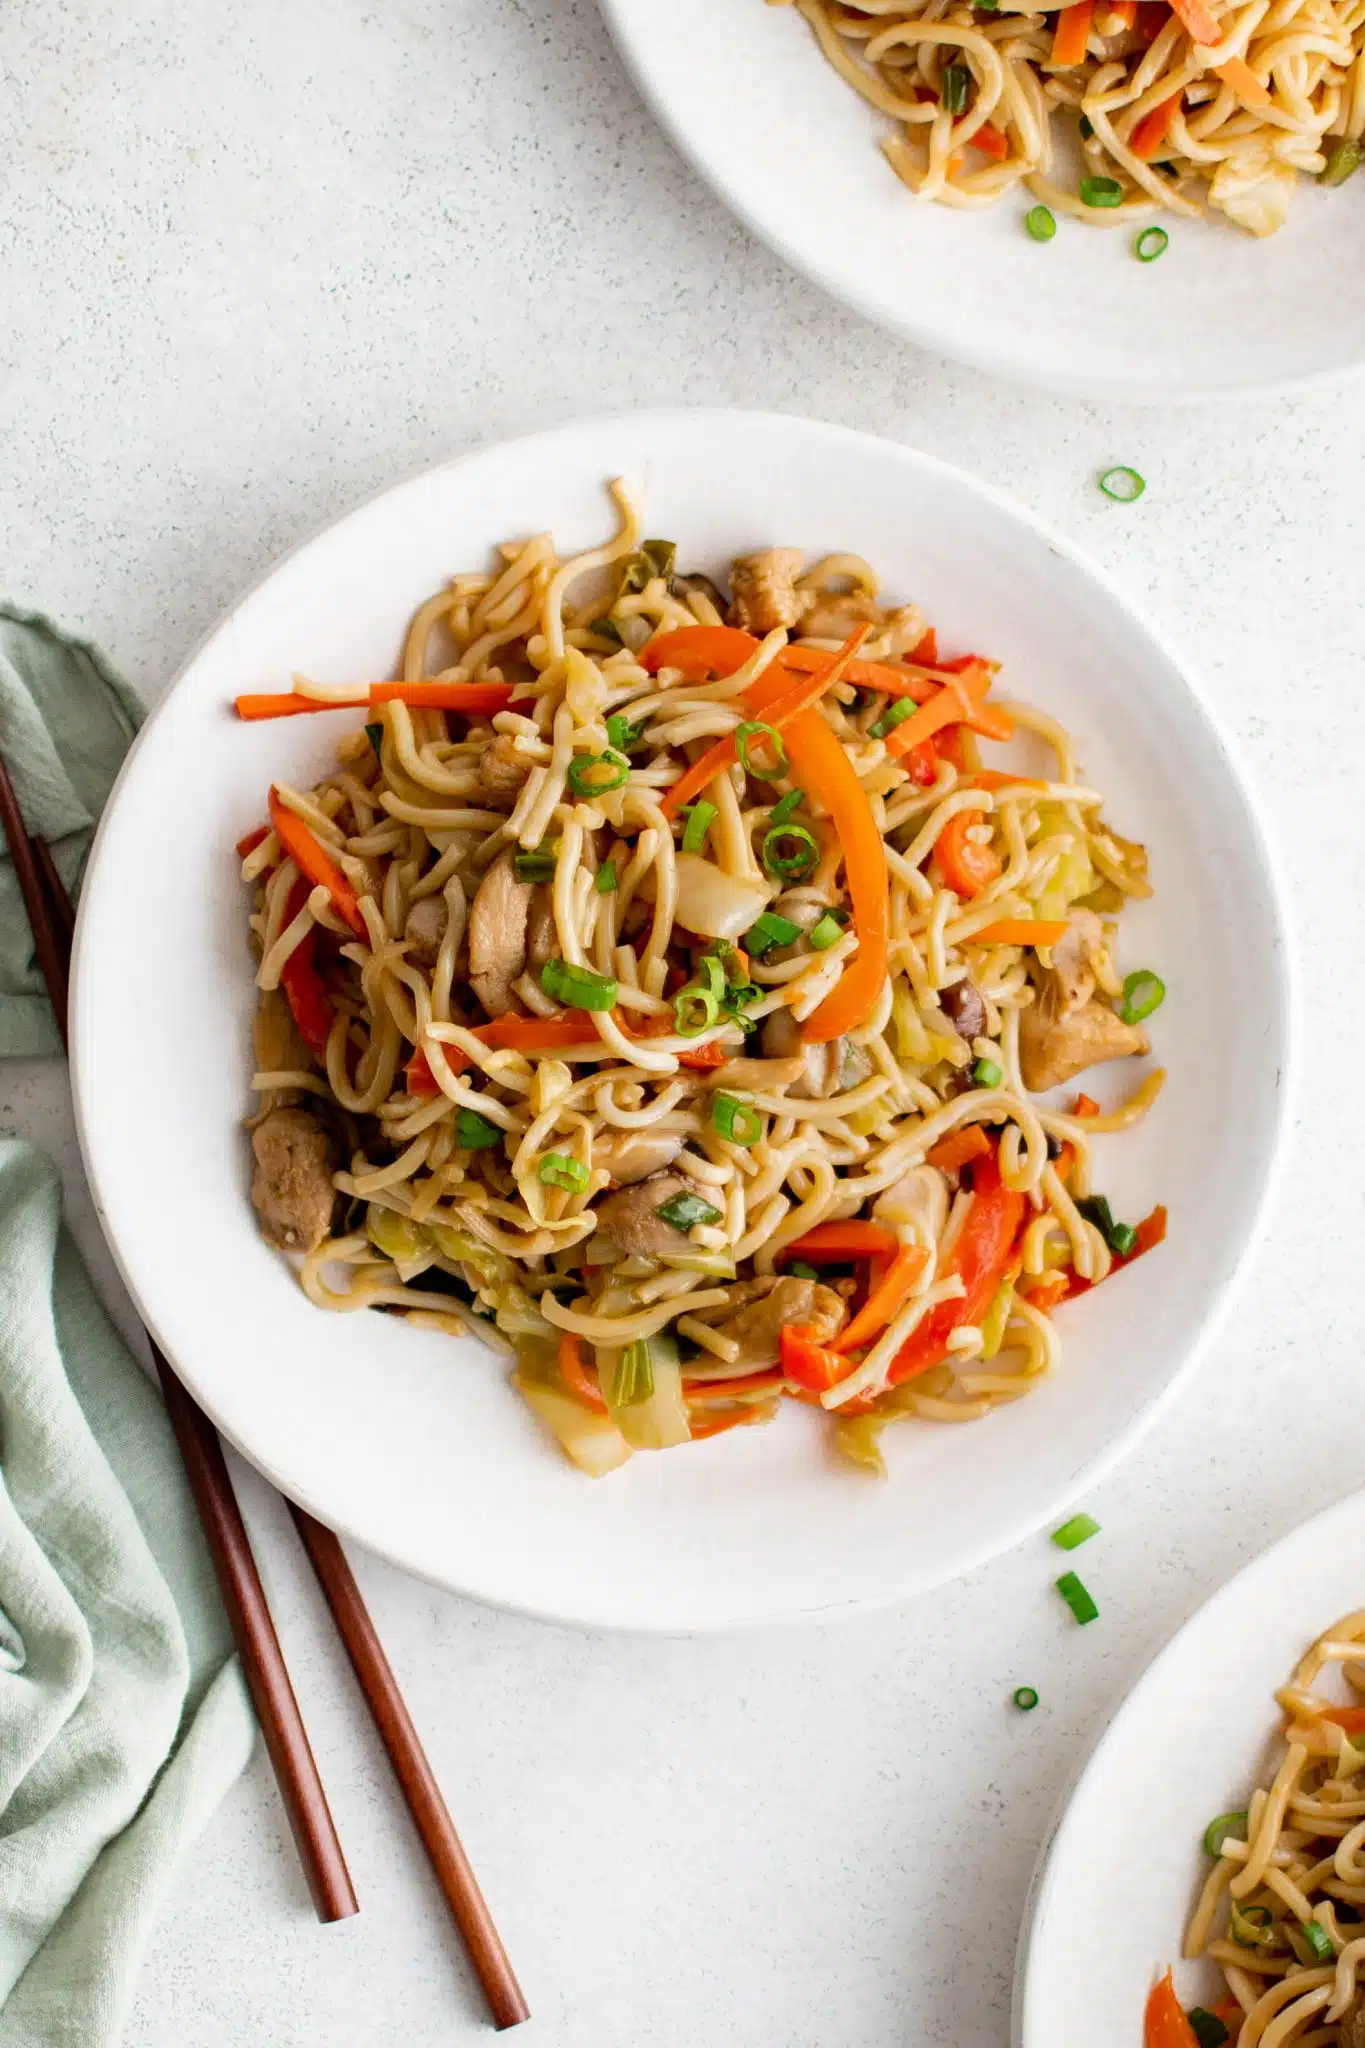 Yakisoba Noodles Recipe - The Forked Spoon